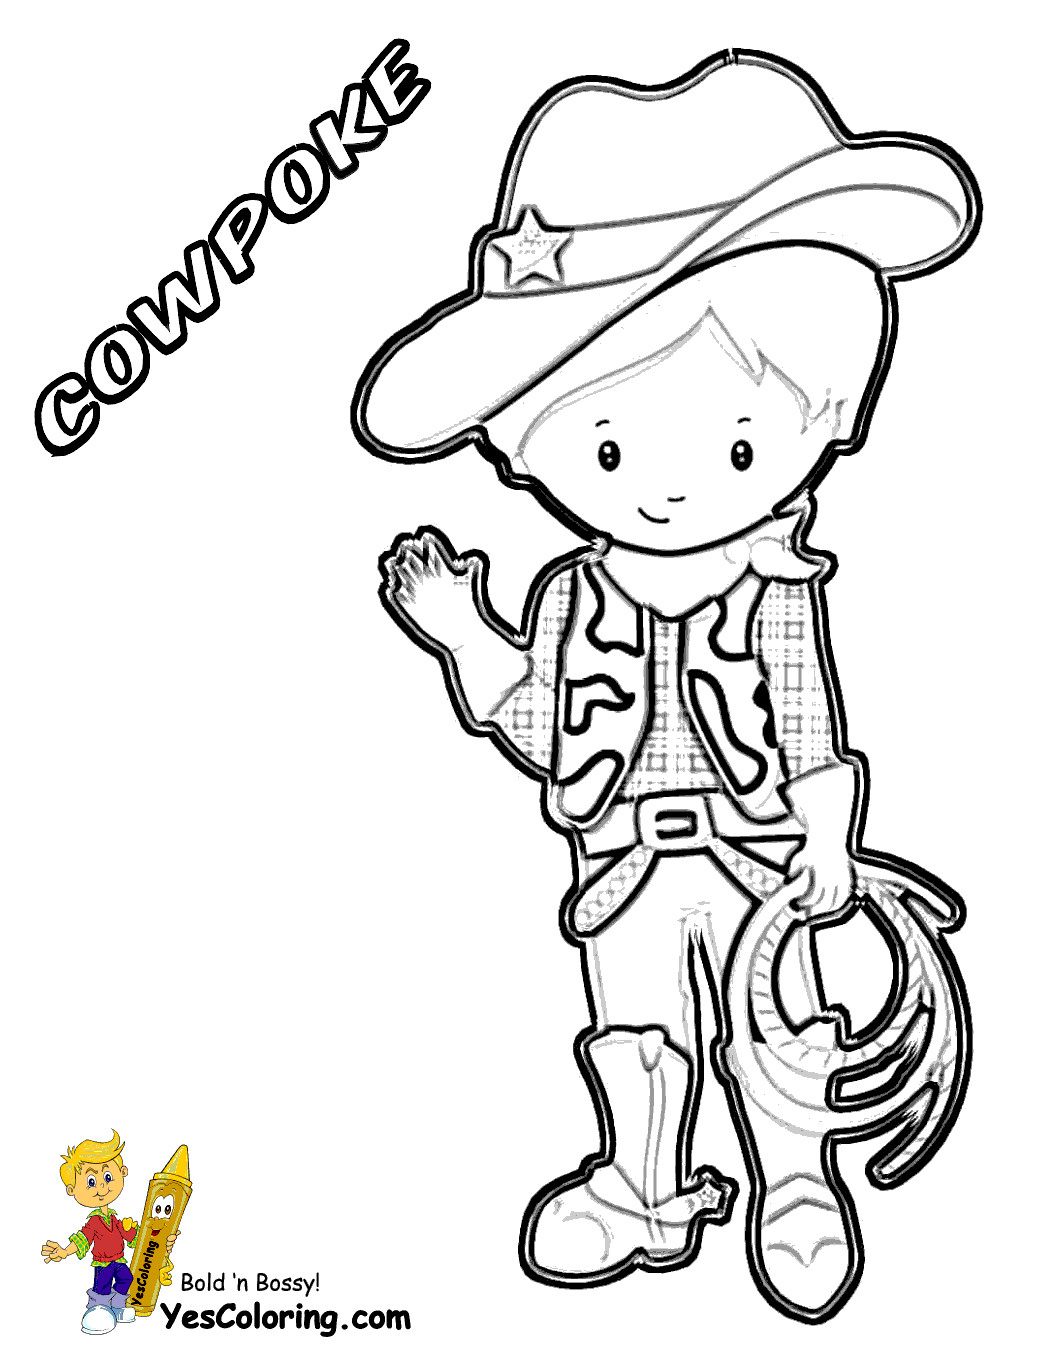 Printable Cowboy Coloring Pages
 Ride em Cowboy Coloring Free Coloring For Kids